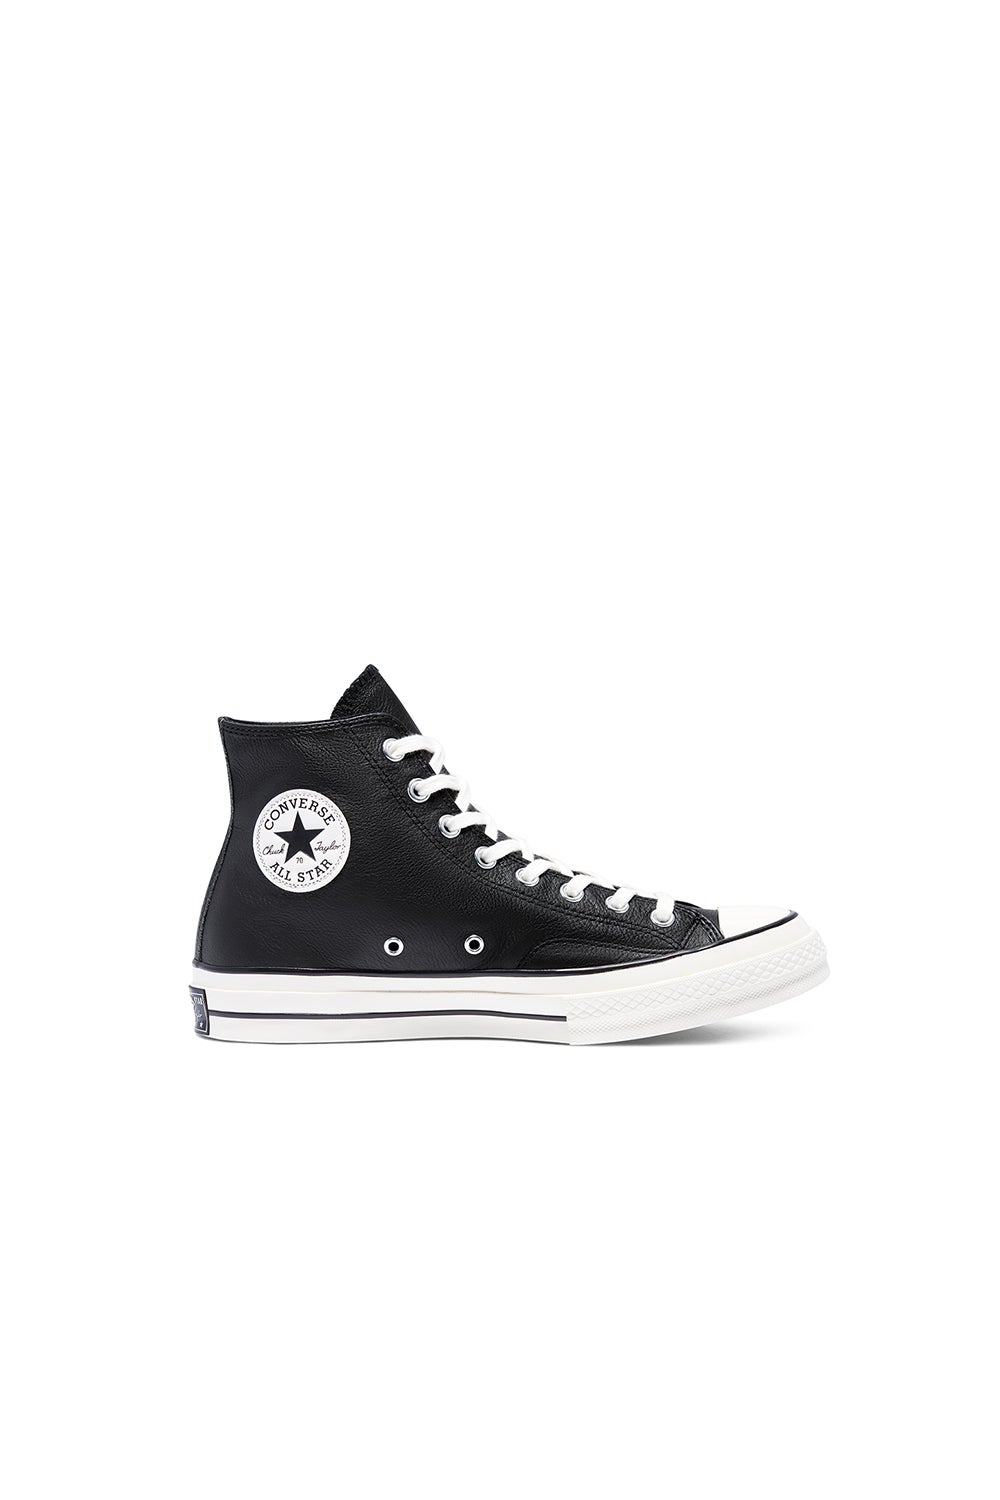 black high top converse leather